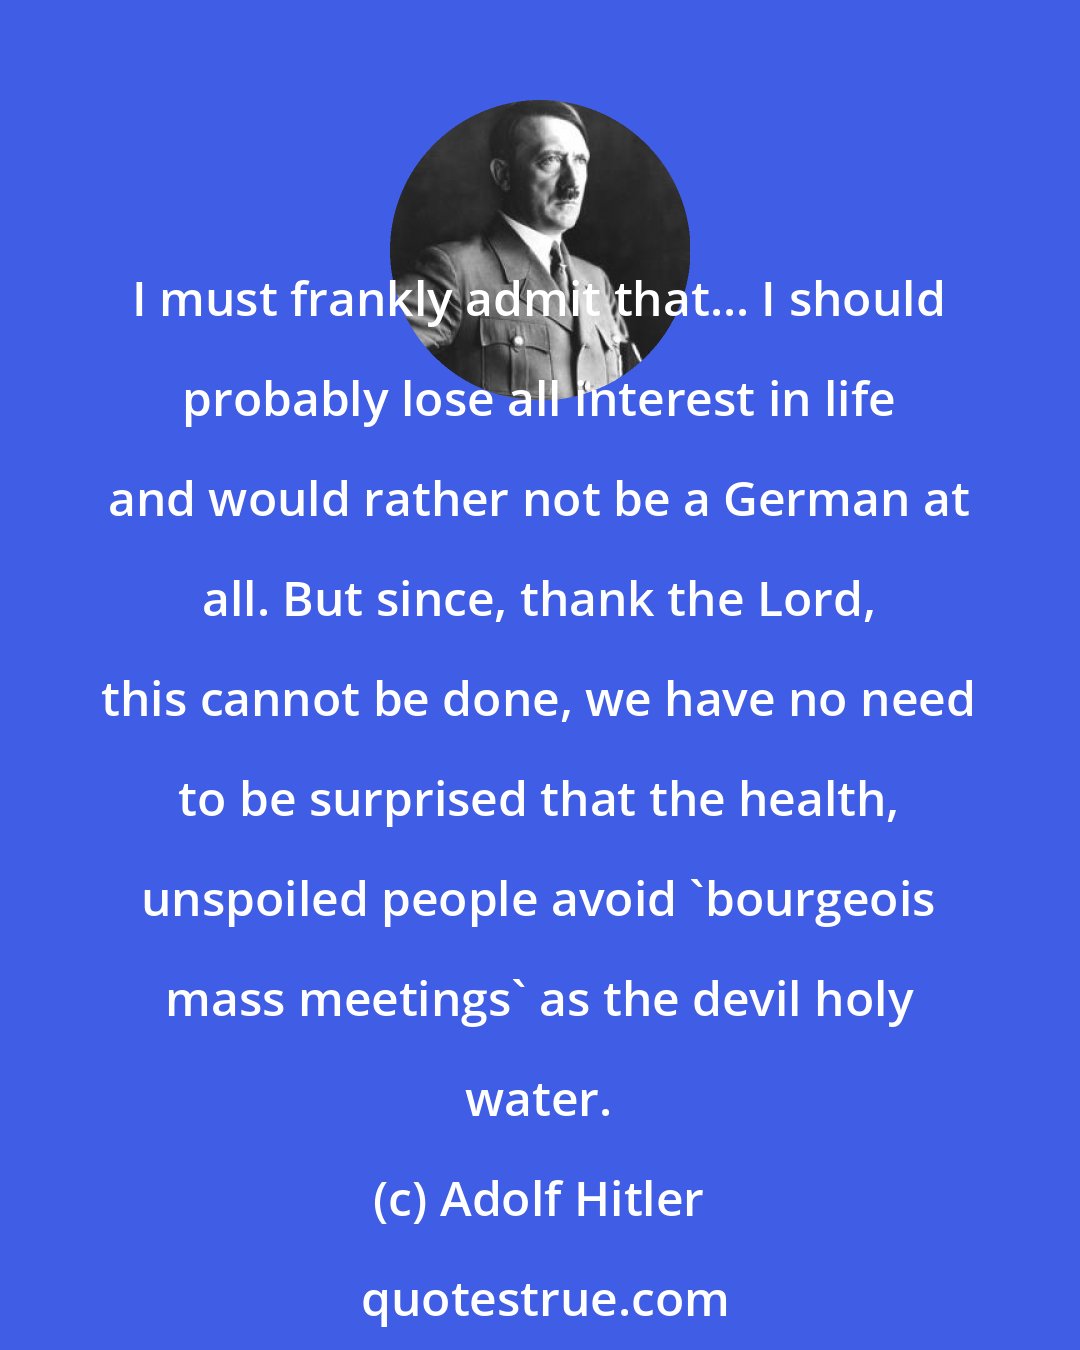 Adolf Hitler: I must frankly admit that... I should probably lose all interest in life and would rather not be a German at all. But since, thank the Lord, this cannot be done, we have no need to be surprised that the health, unspoiled people avoid 'bourgeois mass meetings' as the devil holy water.